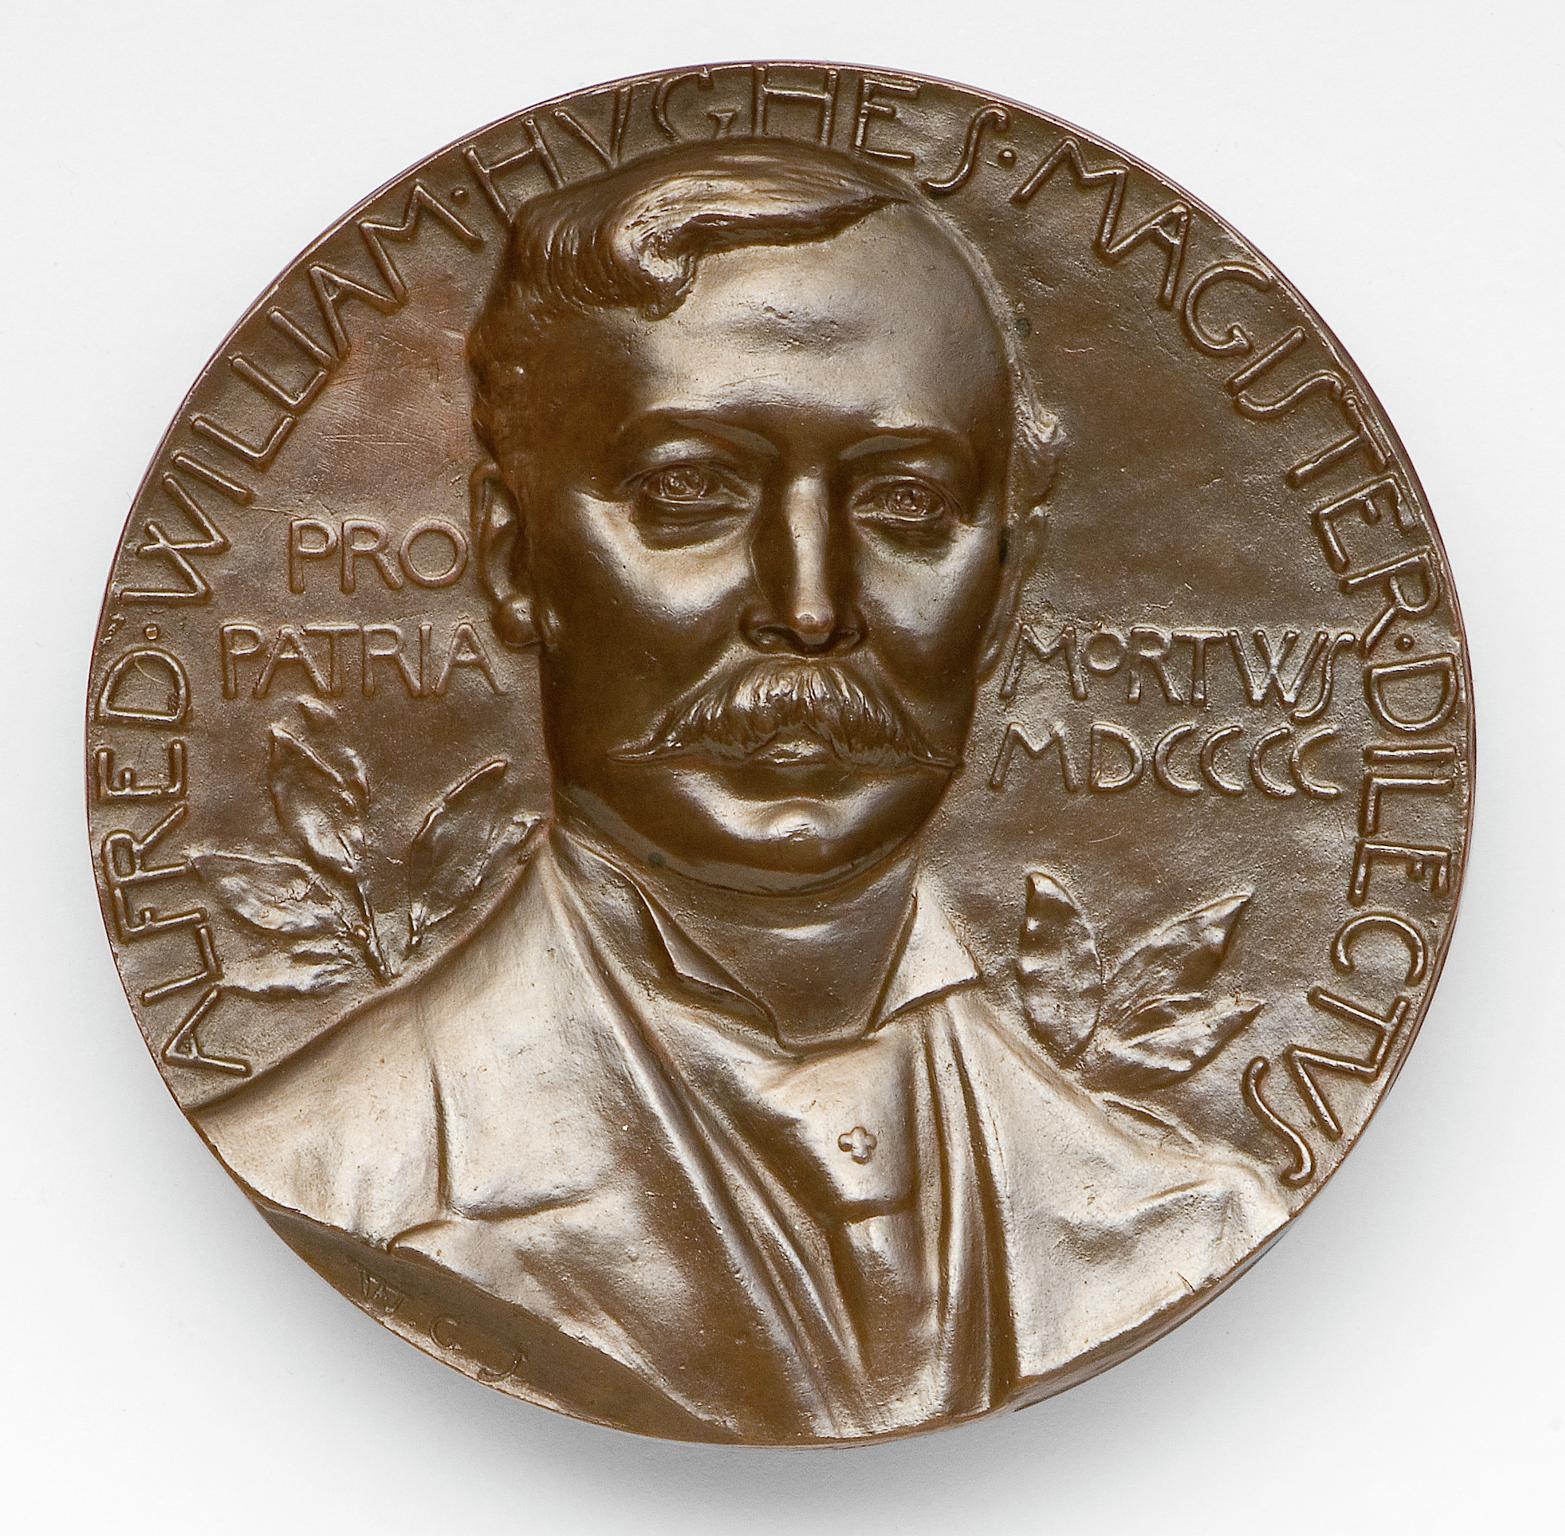 Hughes Medal for Anatomy - obverse